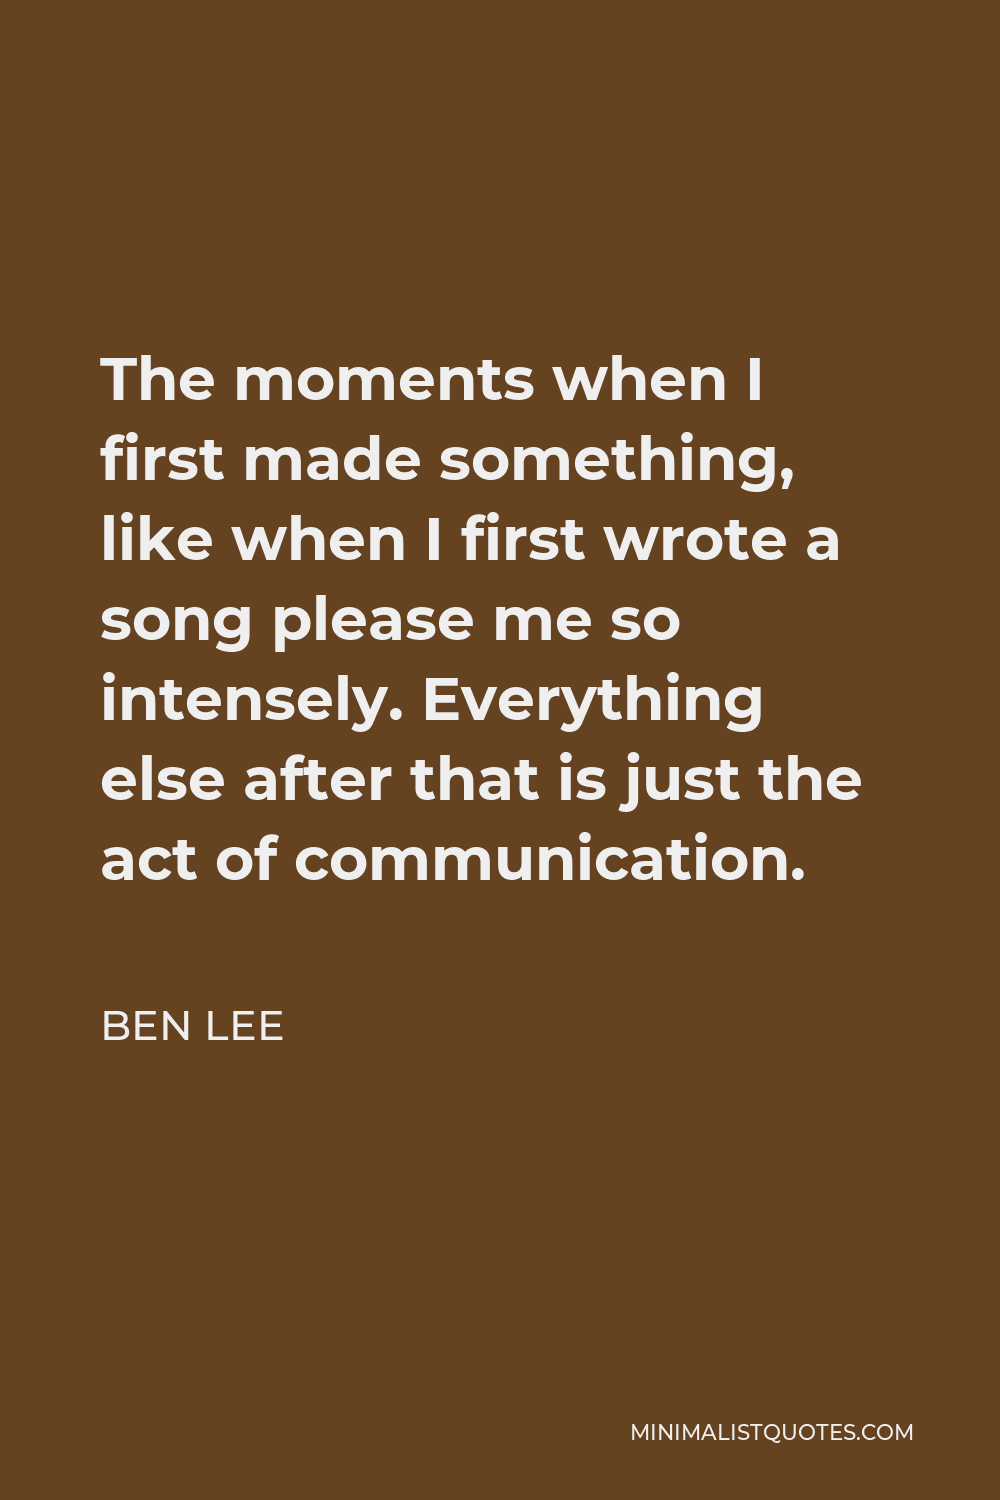 Ben Lee Quote - The moments when I first made something, like when I first wrote a song please me so intensely. Everything else after that is just the act of communication.